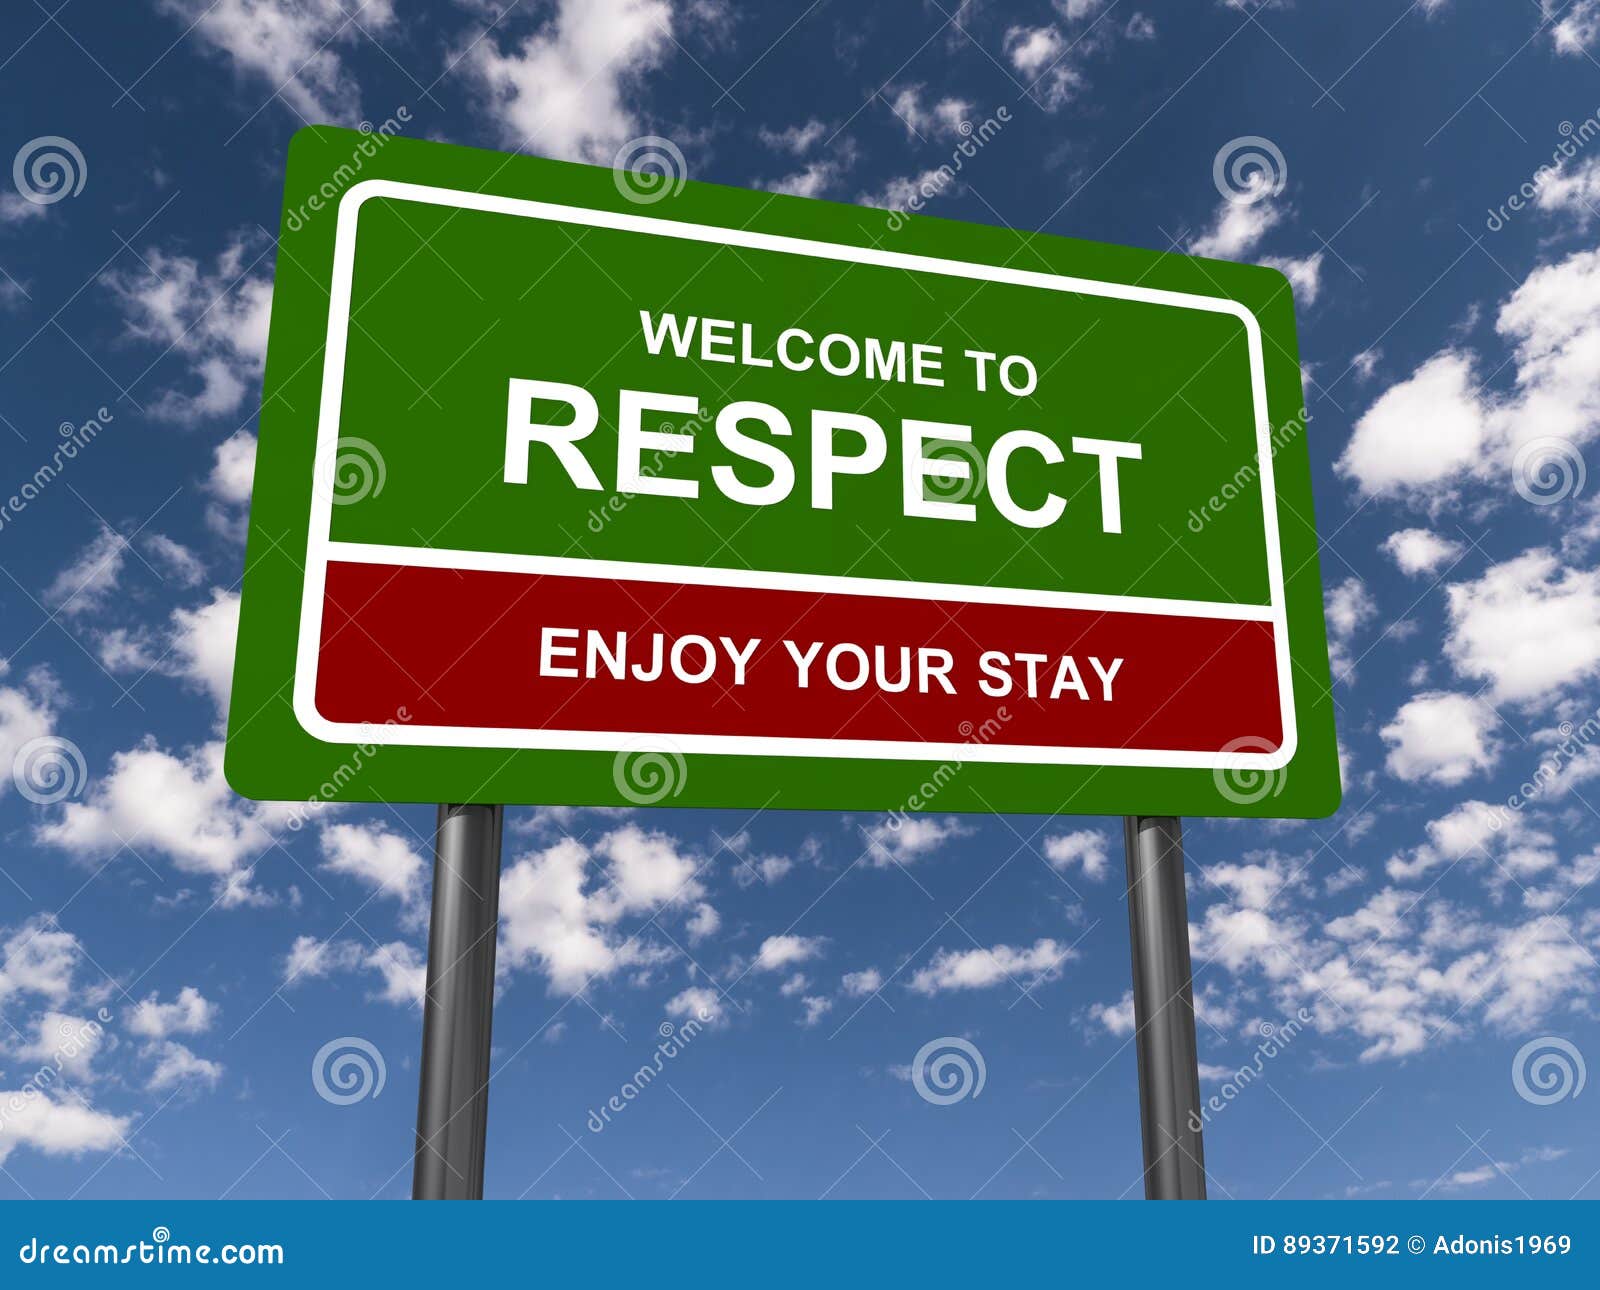 welcome to respect sign